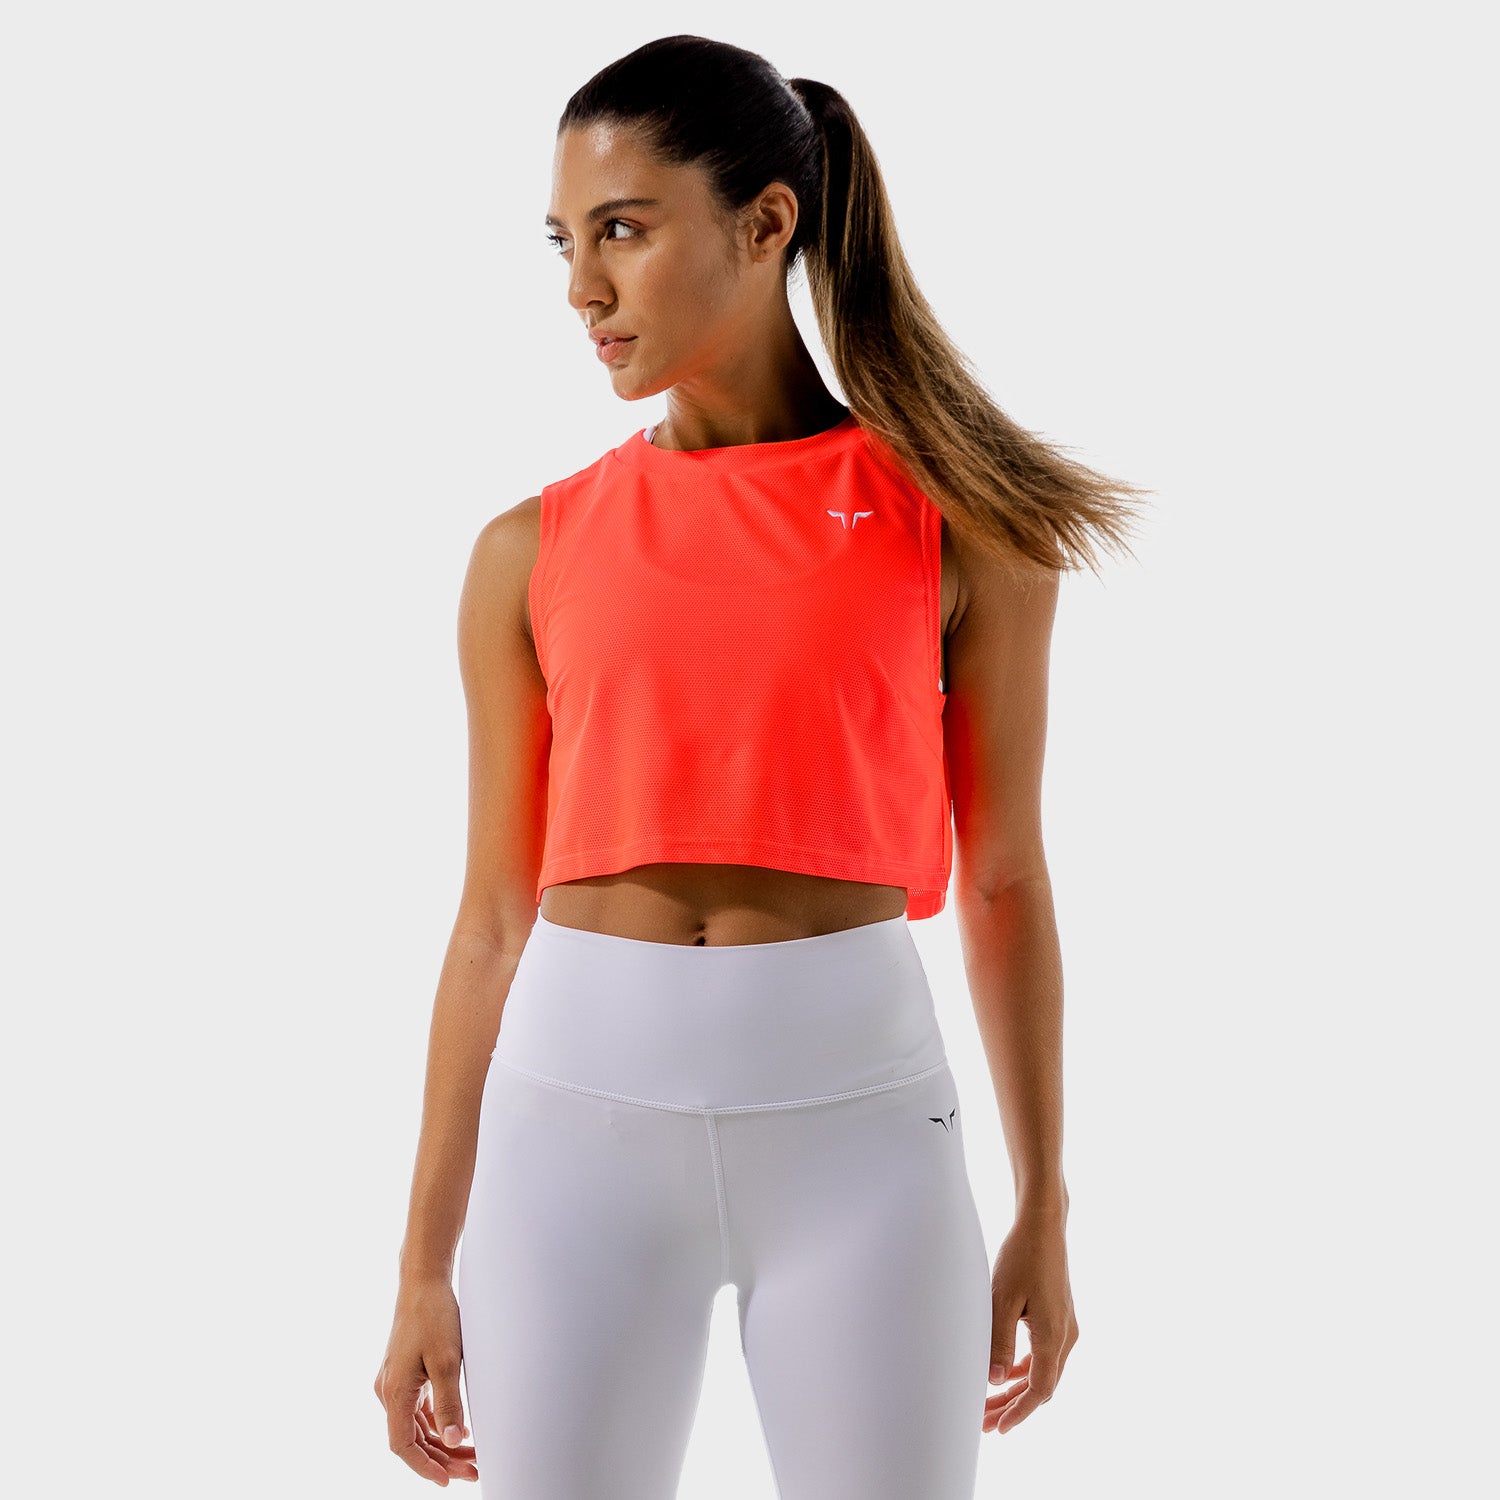 AE, Limitless Crop Top - Coral, Workout Tank Tops Women